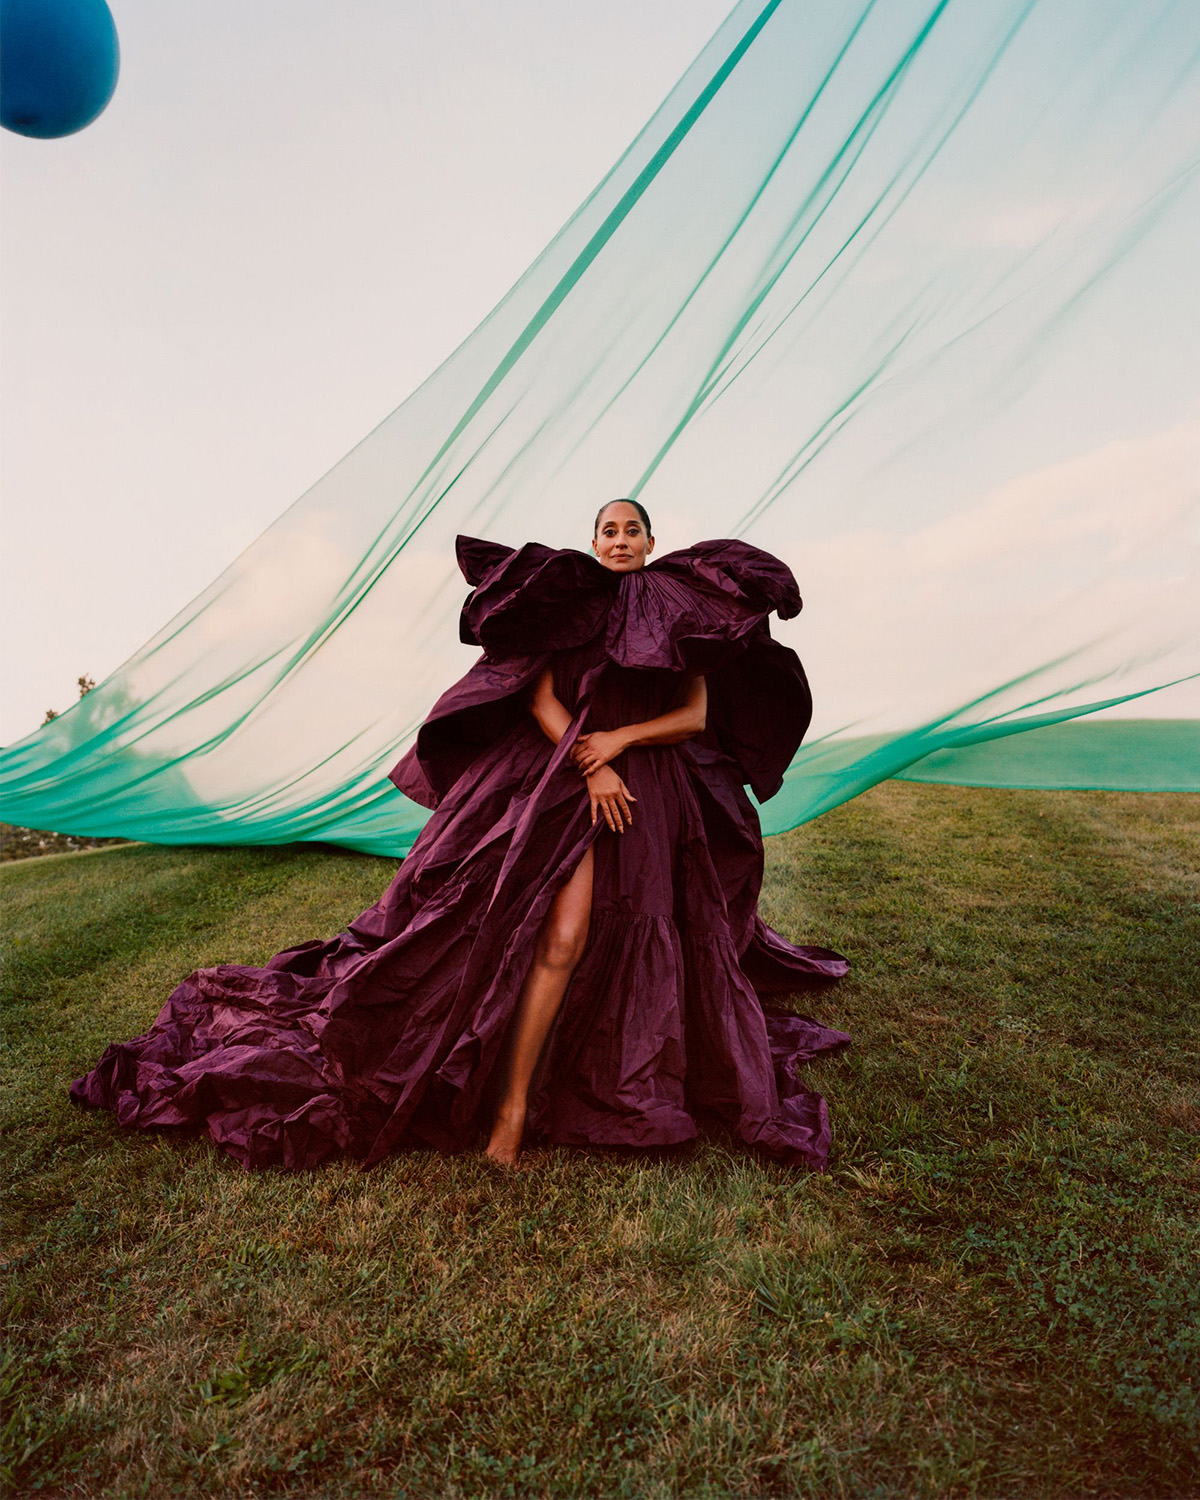 Tracee Ellis Ross covers Harper’s Bazaar US November 2021 by Renell Medrano